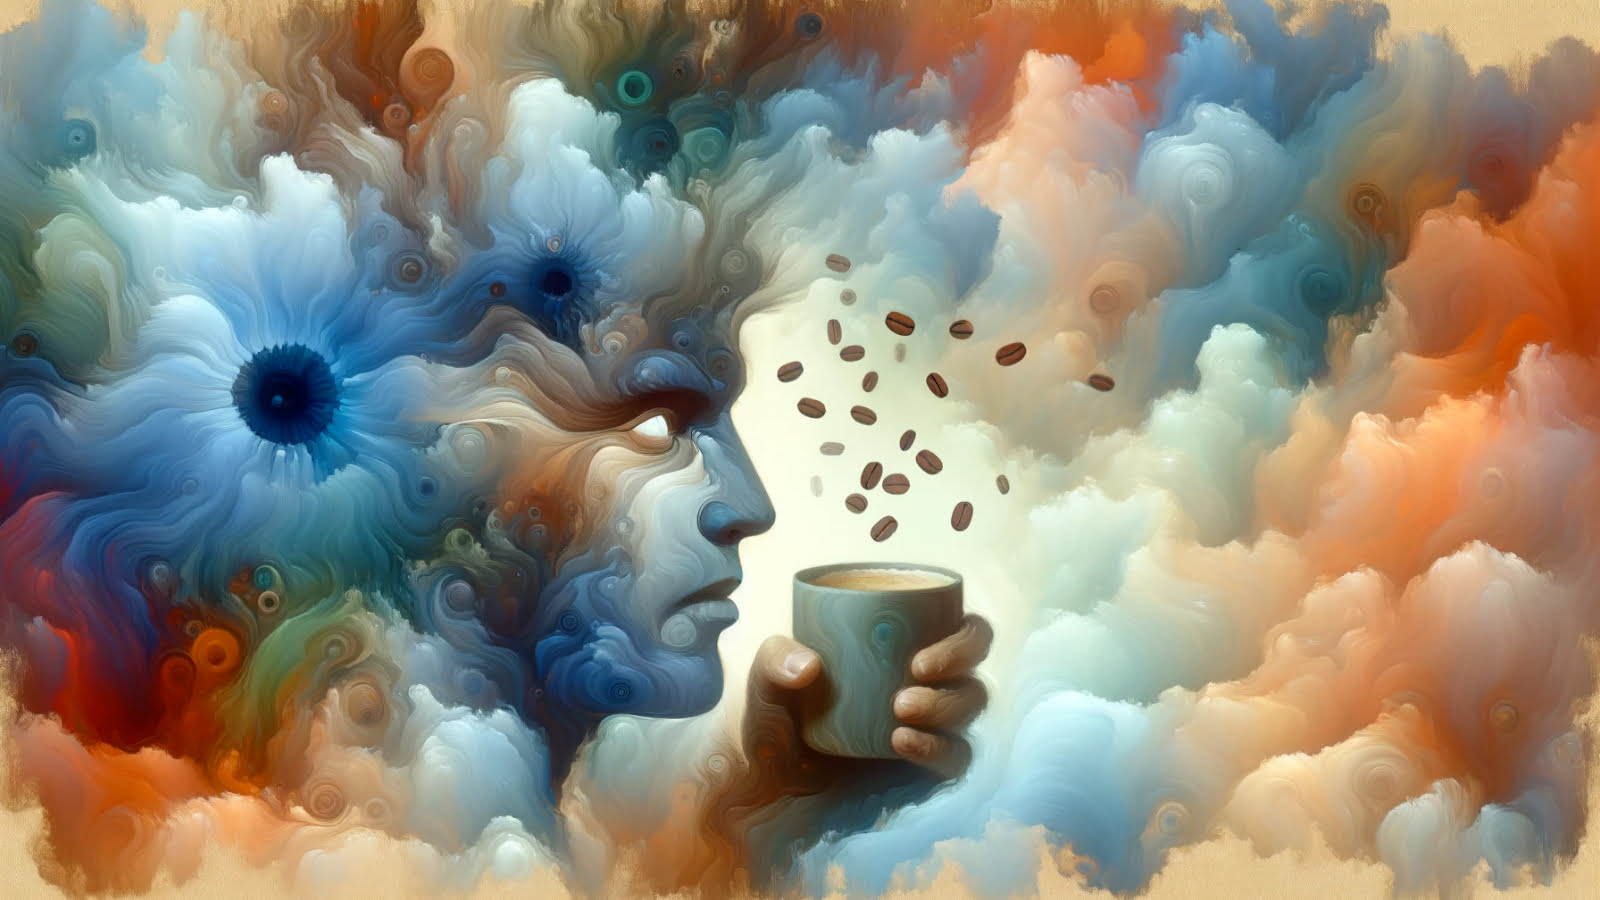 The dynamic influence of caffeine on individuals with ADHD illustrated through vibrant and surreal art.